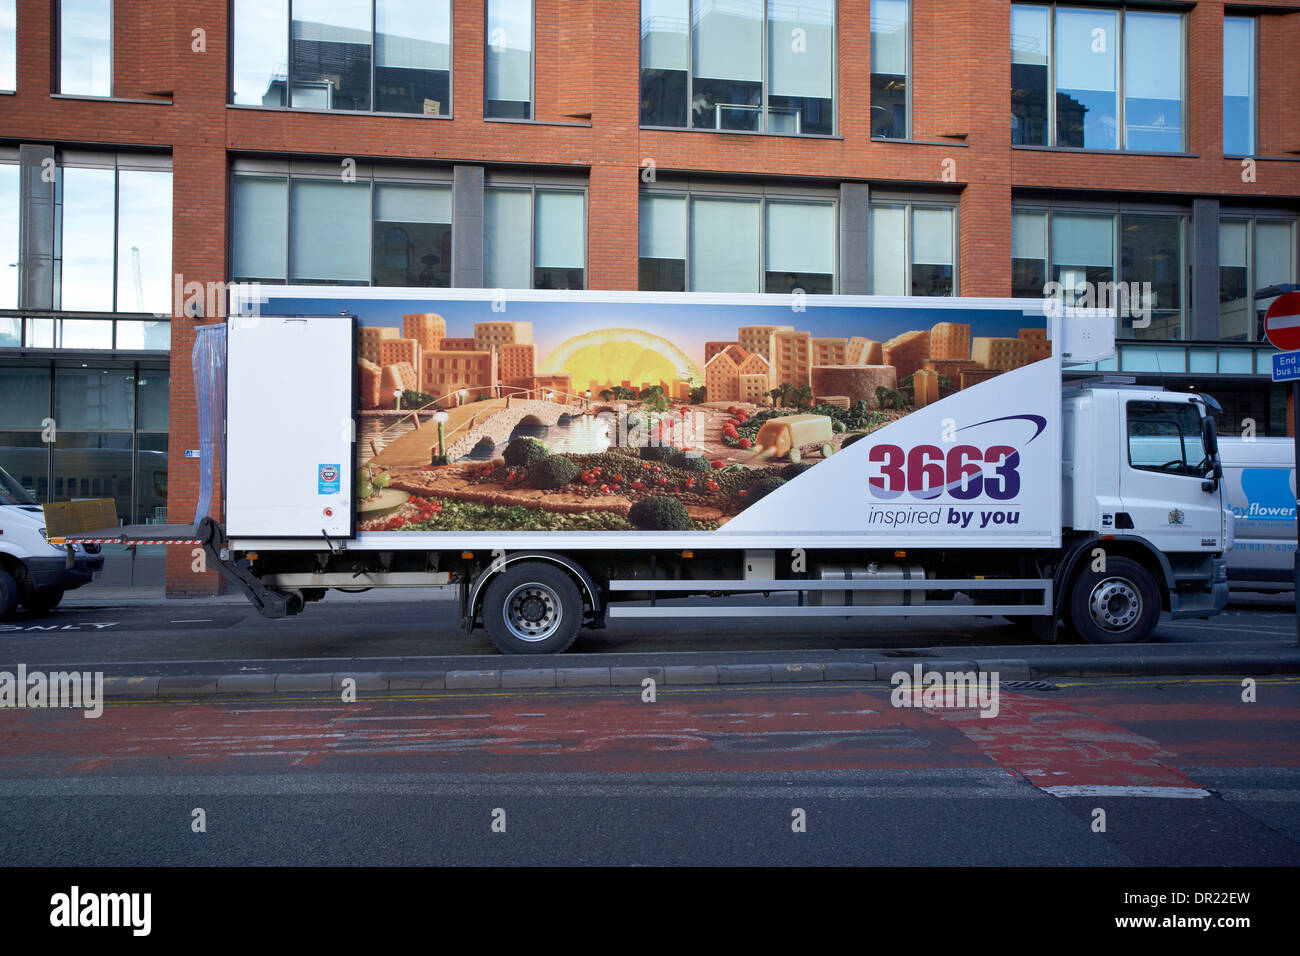 3663 food service lorry in Manchester UK Stock Photo